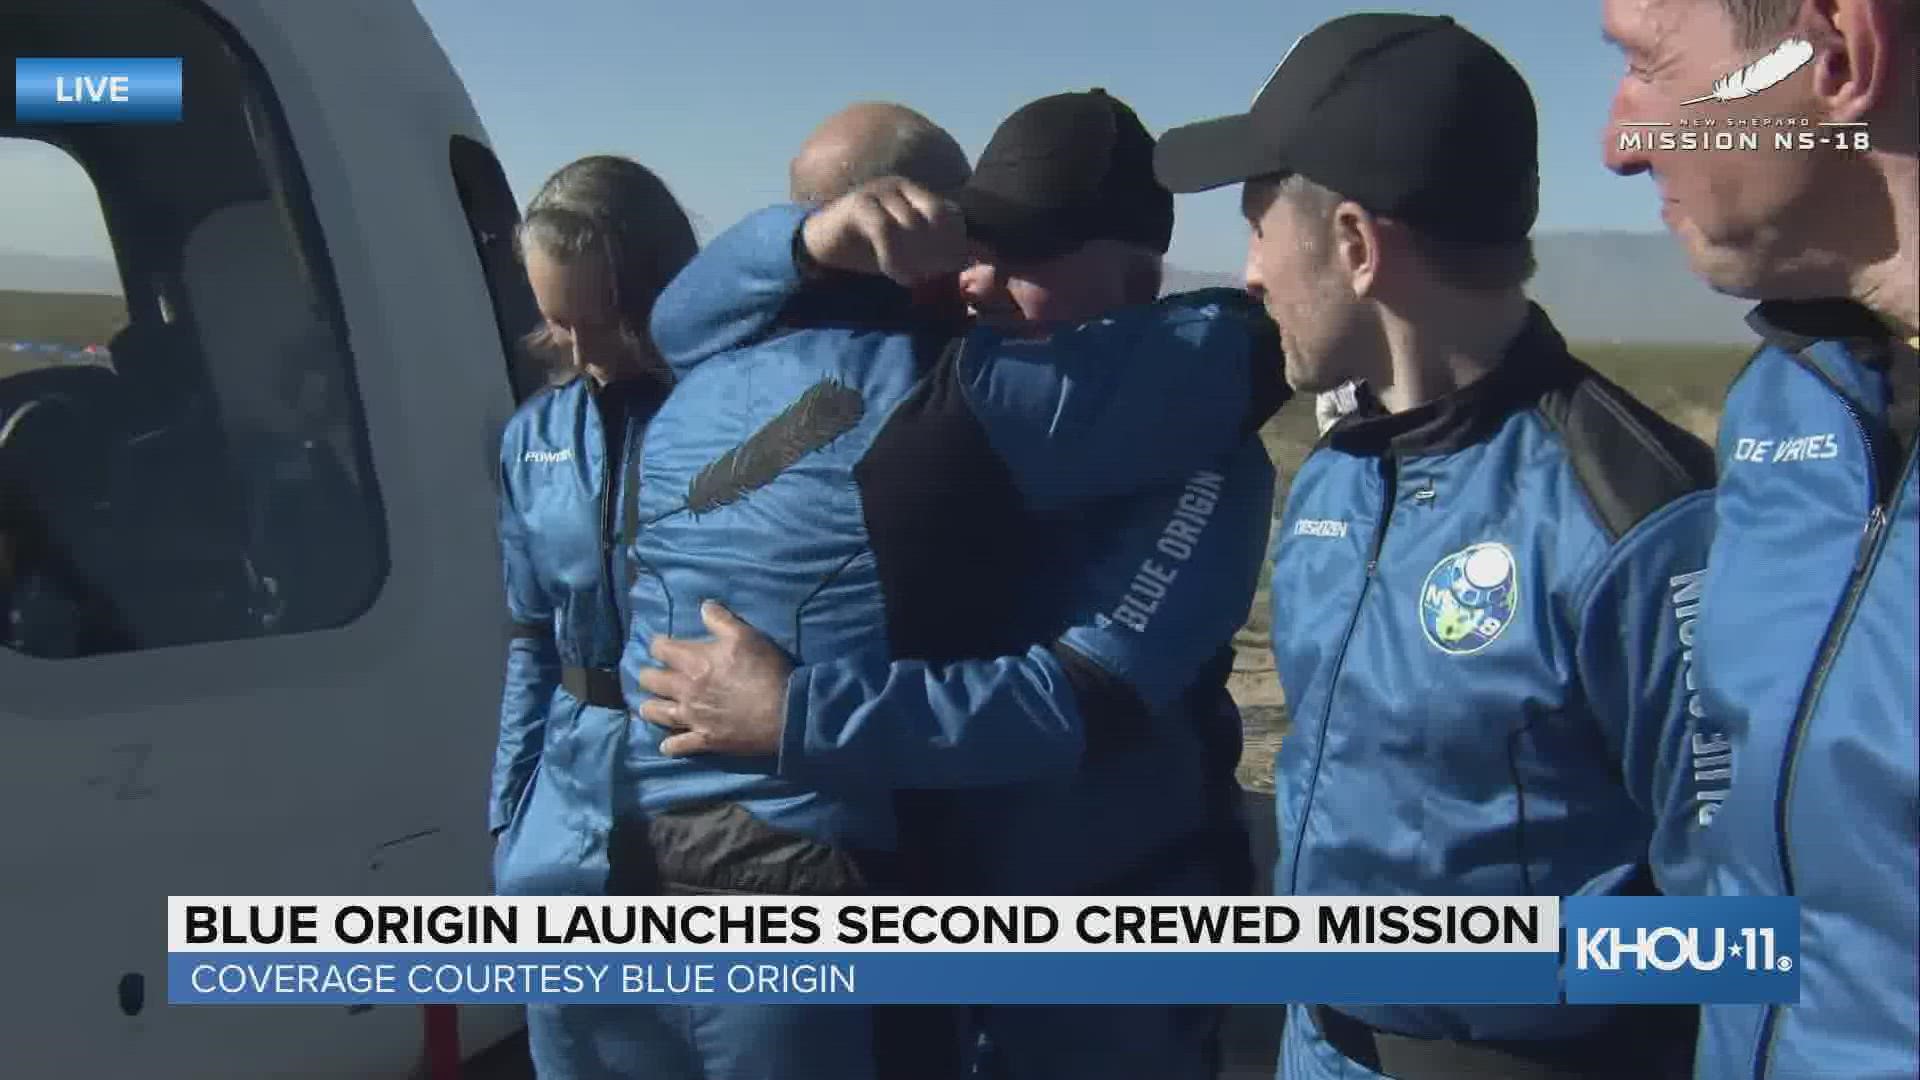 This is video from shortly after landing for the crew of the Blue Origin New Shepard mission.